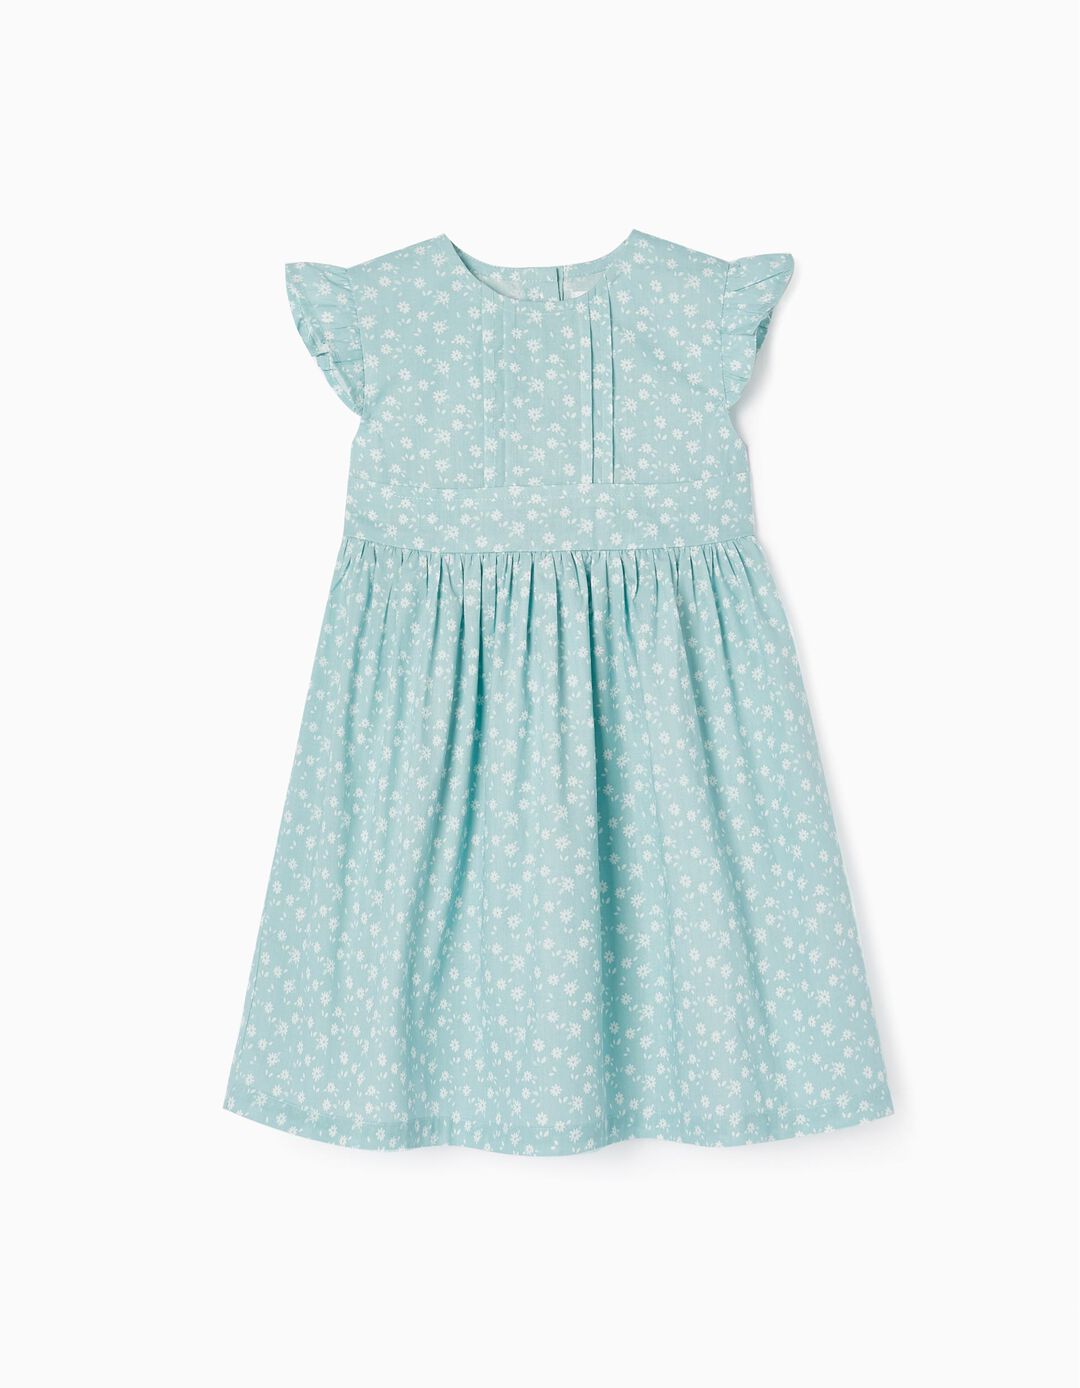 Floral Cotton Dress for Baby Girls, Blue